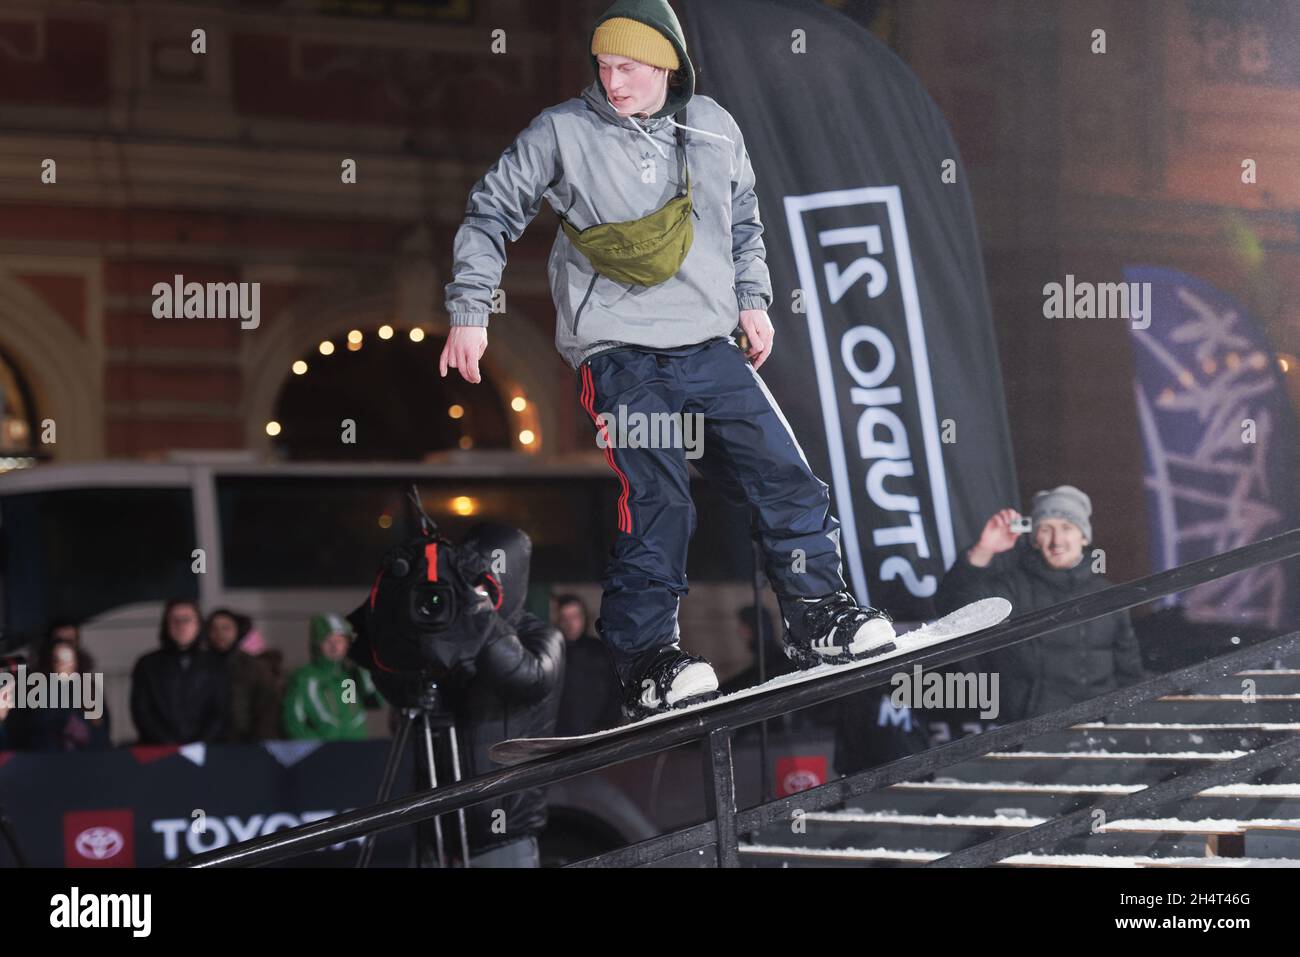 St. Petersburg, Russia, 23rd February, 2019: Snowboarder performs trick during the festival of extreme snowboarding Stairs and Rails Stock Photo